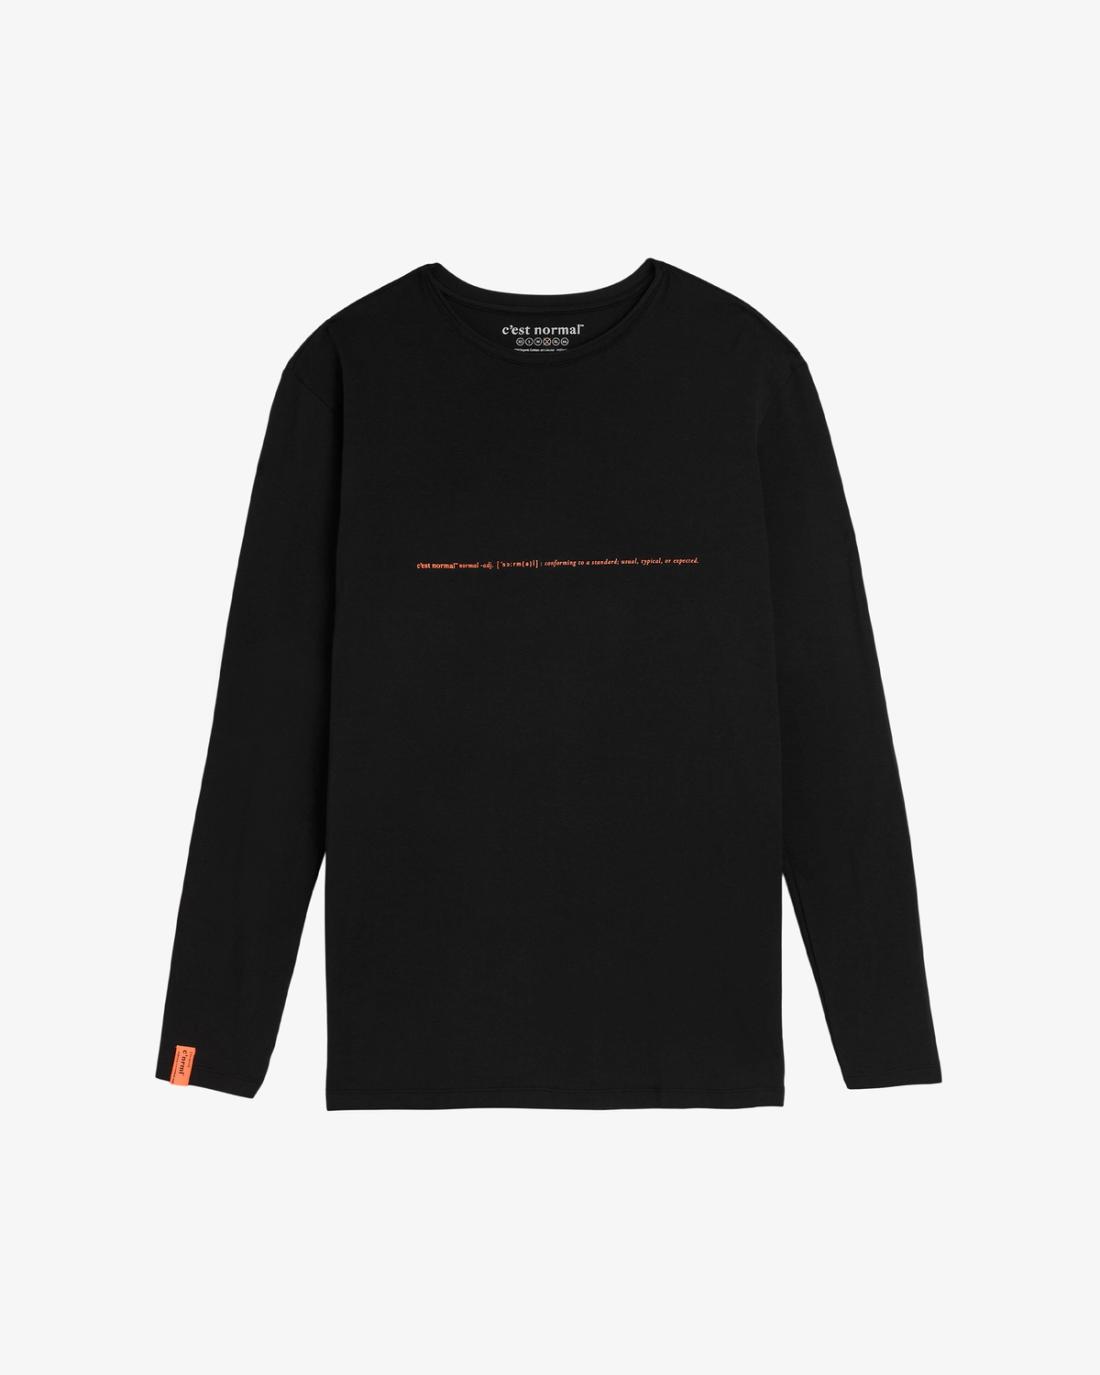 The Forever T Long Sleeve